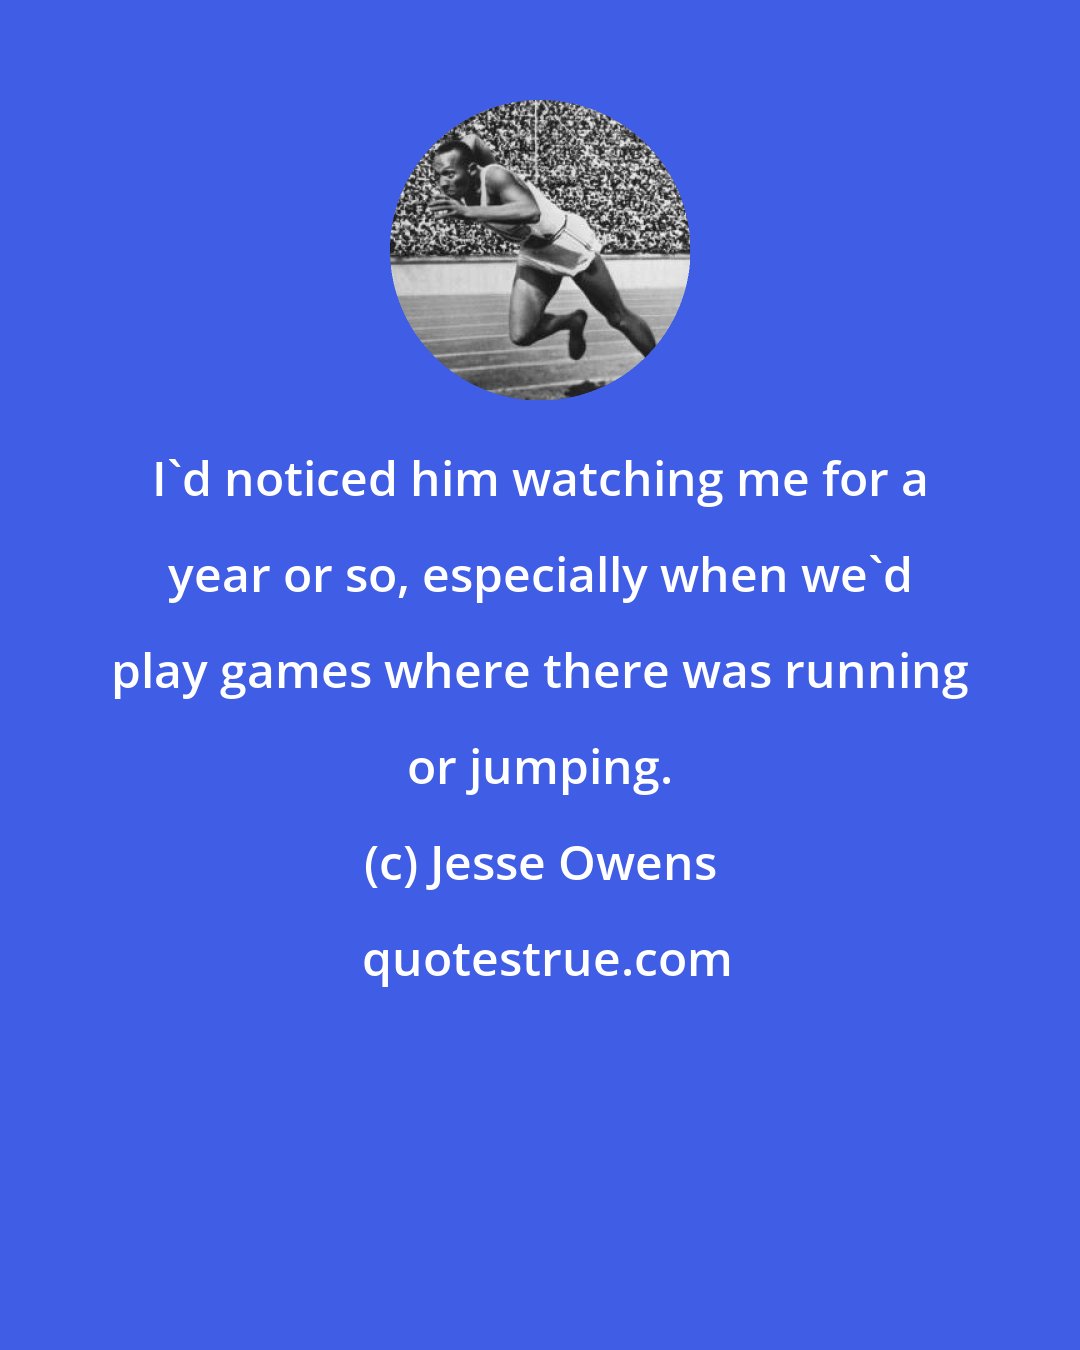 Jesse Owens: I'd noticed him watching me for a year or so, especially when we'd play games where there was running or jumping.